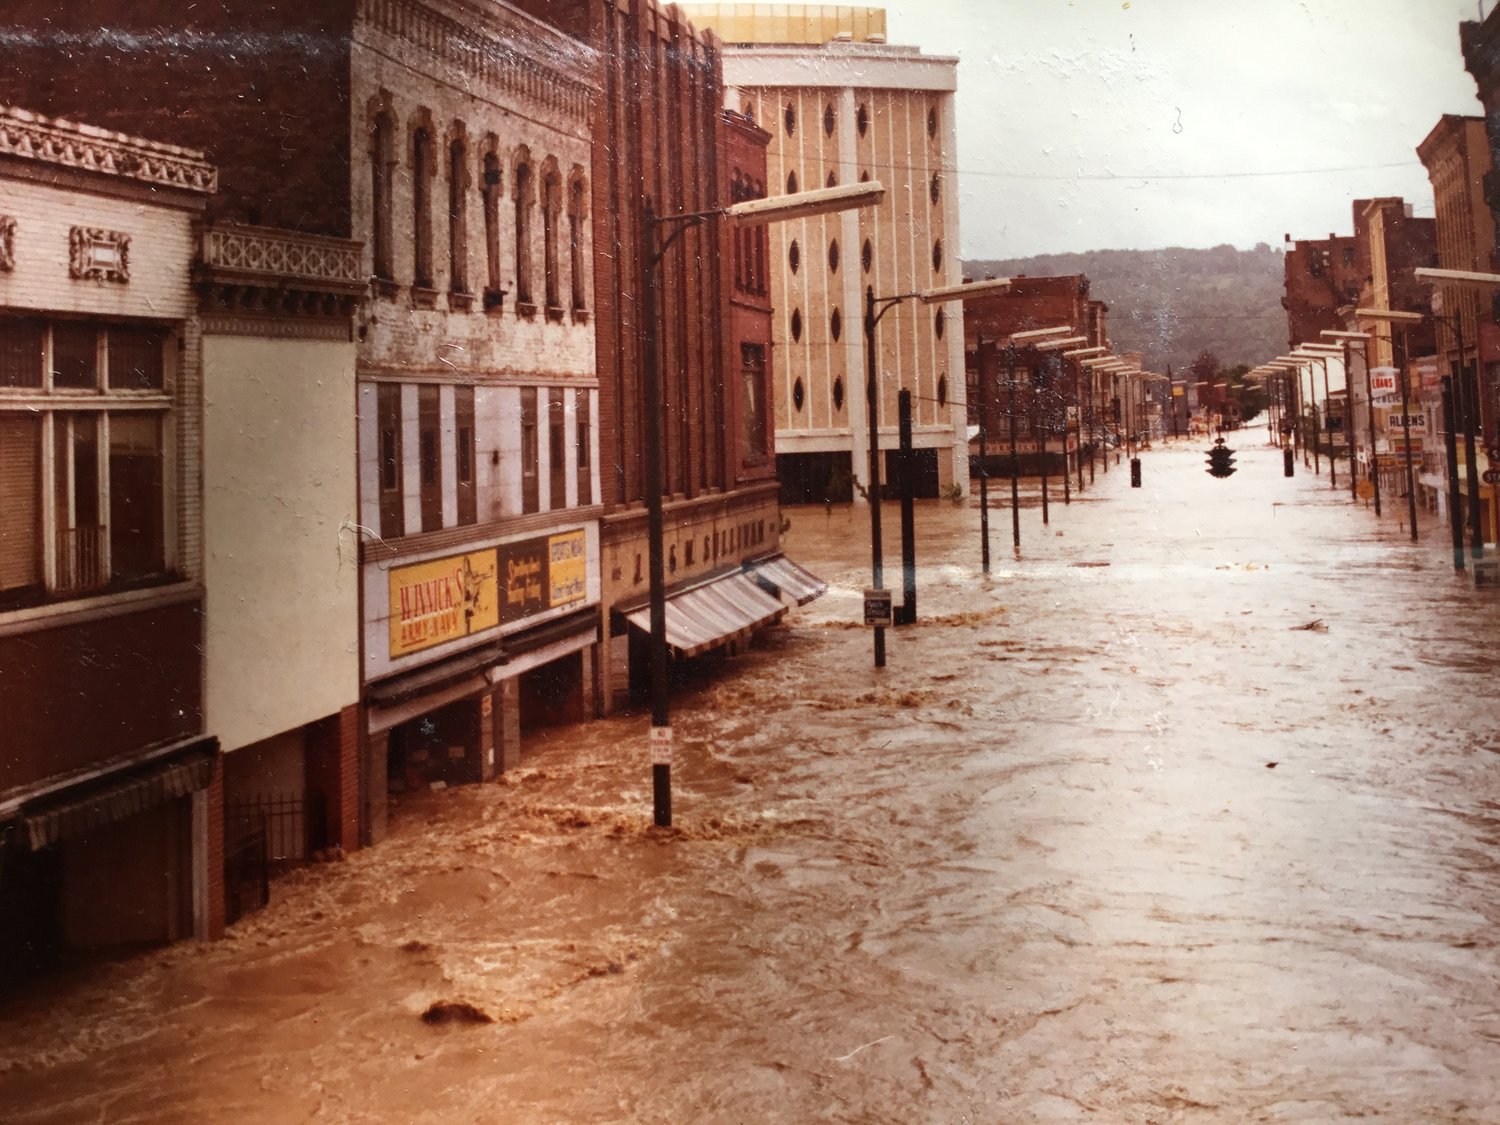 Downtown Elmira during the flood of 1972. The heavy rainfall was caused by Hurricane Agnes.